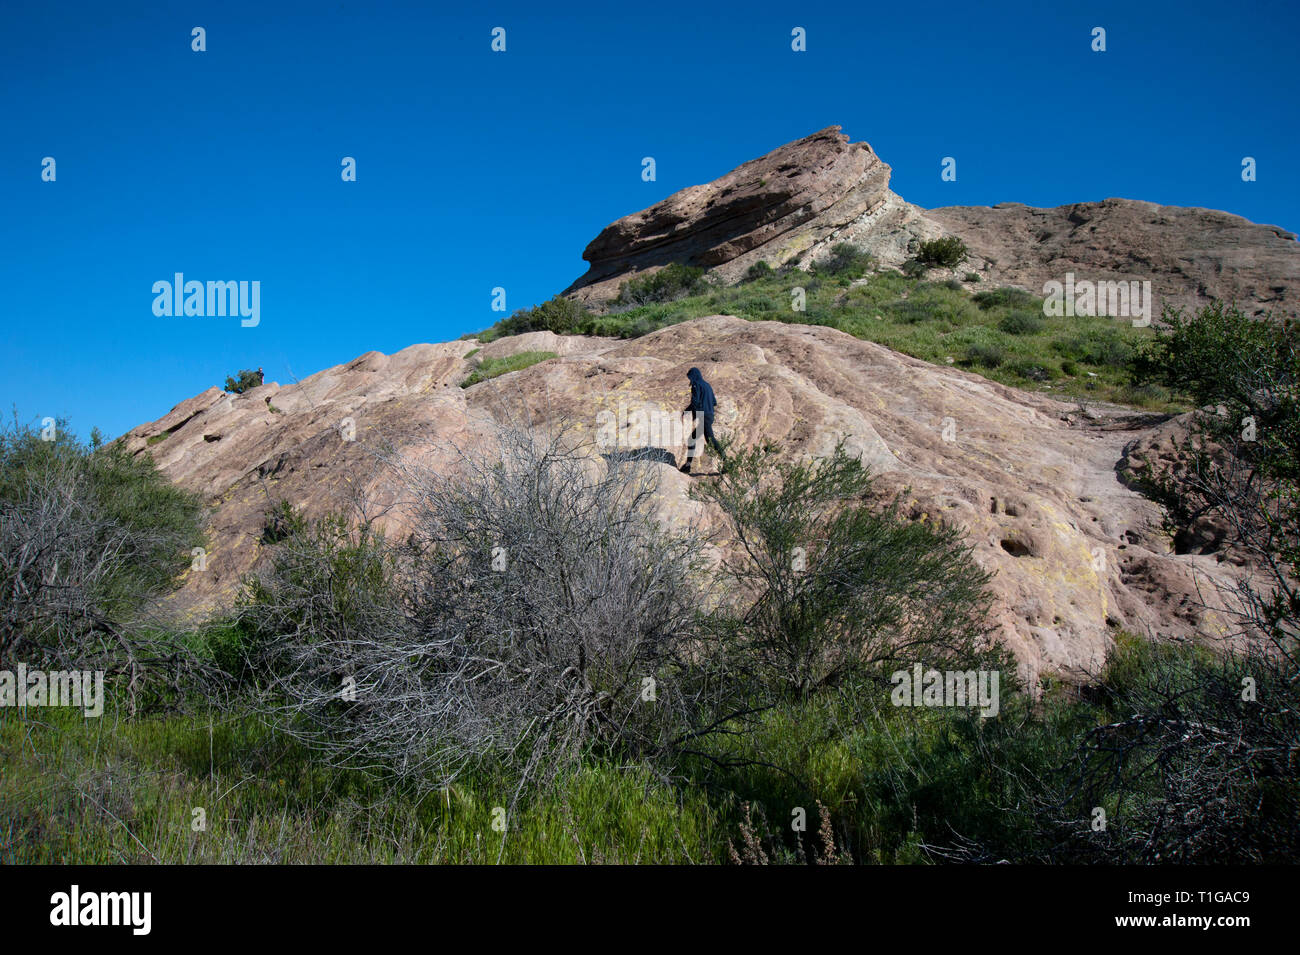 Visitor at Vasquez Rocks near Agua Dulce in the Antelope Valley in Southern California, USA Stock Photo